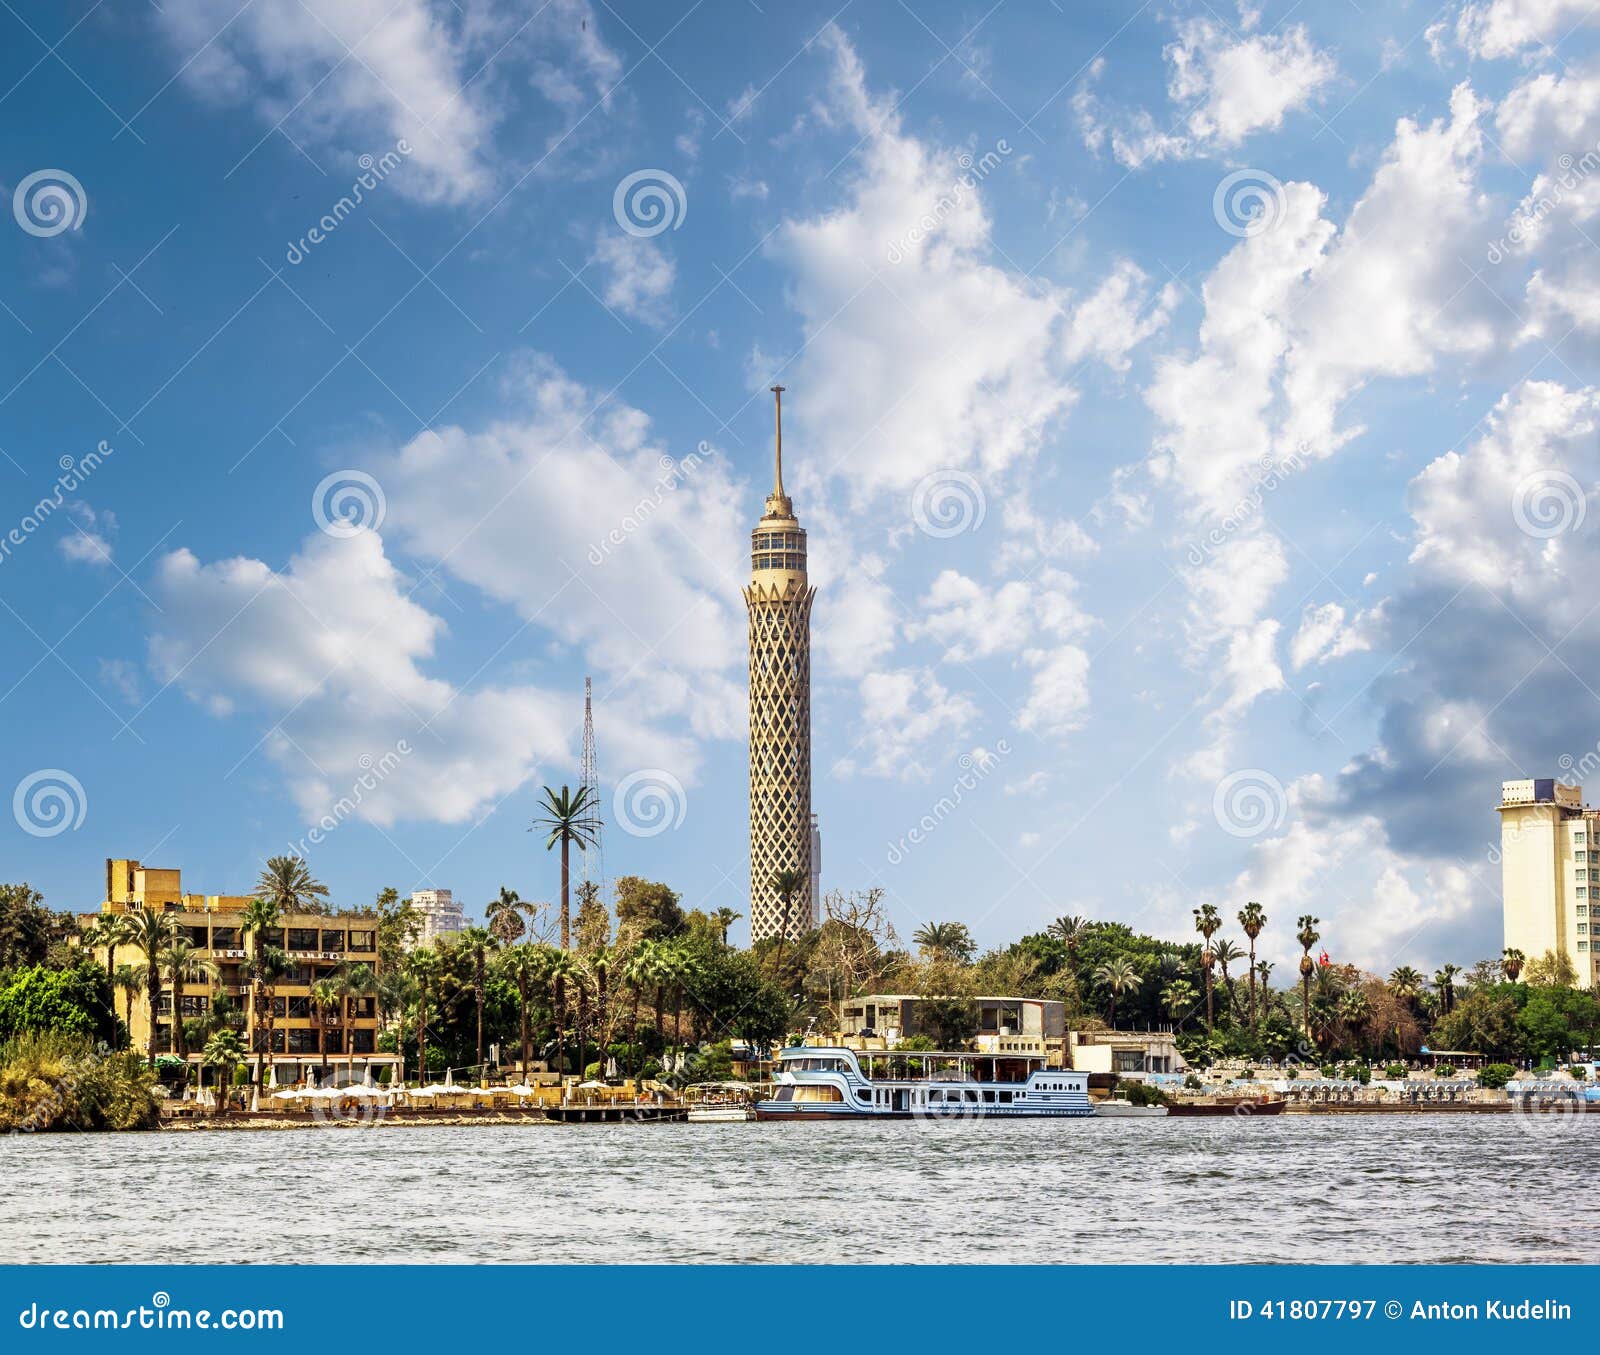 Nile River Views in Cairo Egypt